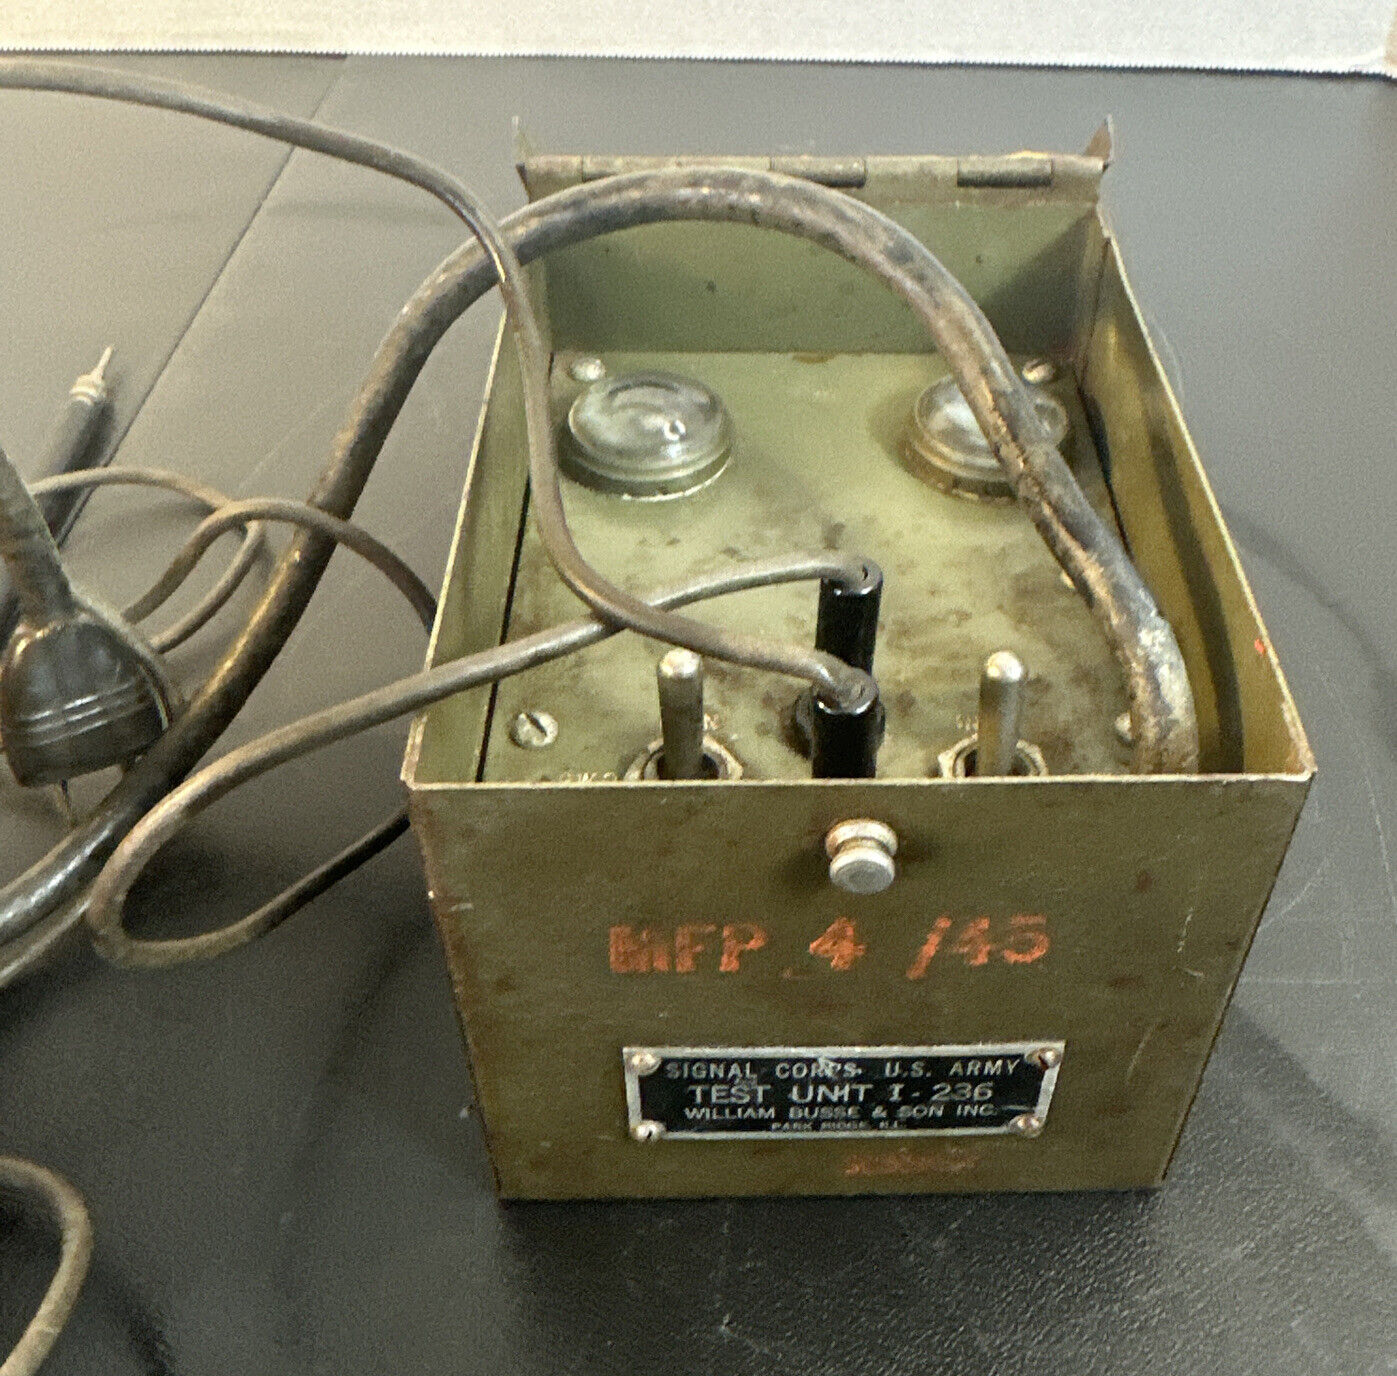 EXCELLENT WWII U.S. Army Signal Corps. Test Unit I-236, Continuity Tester